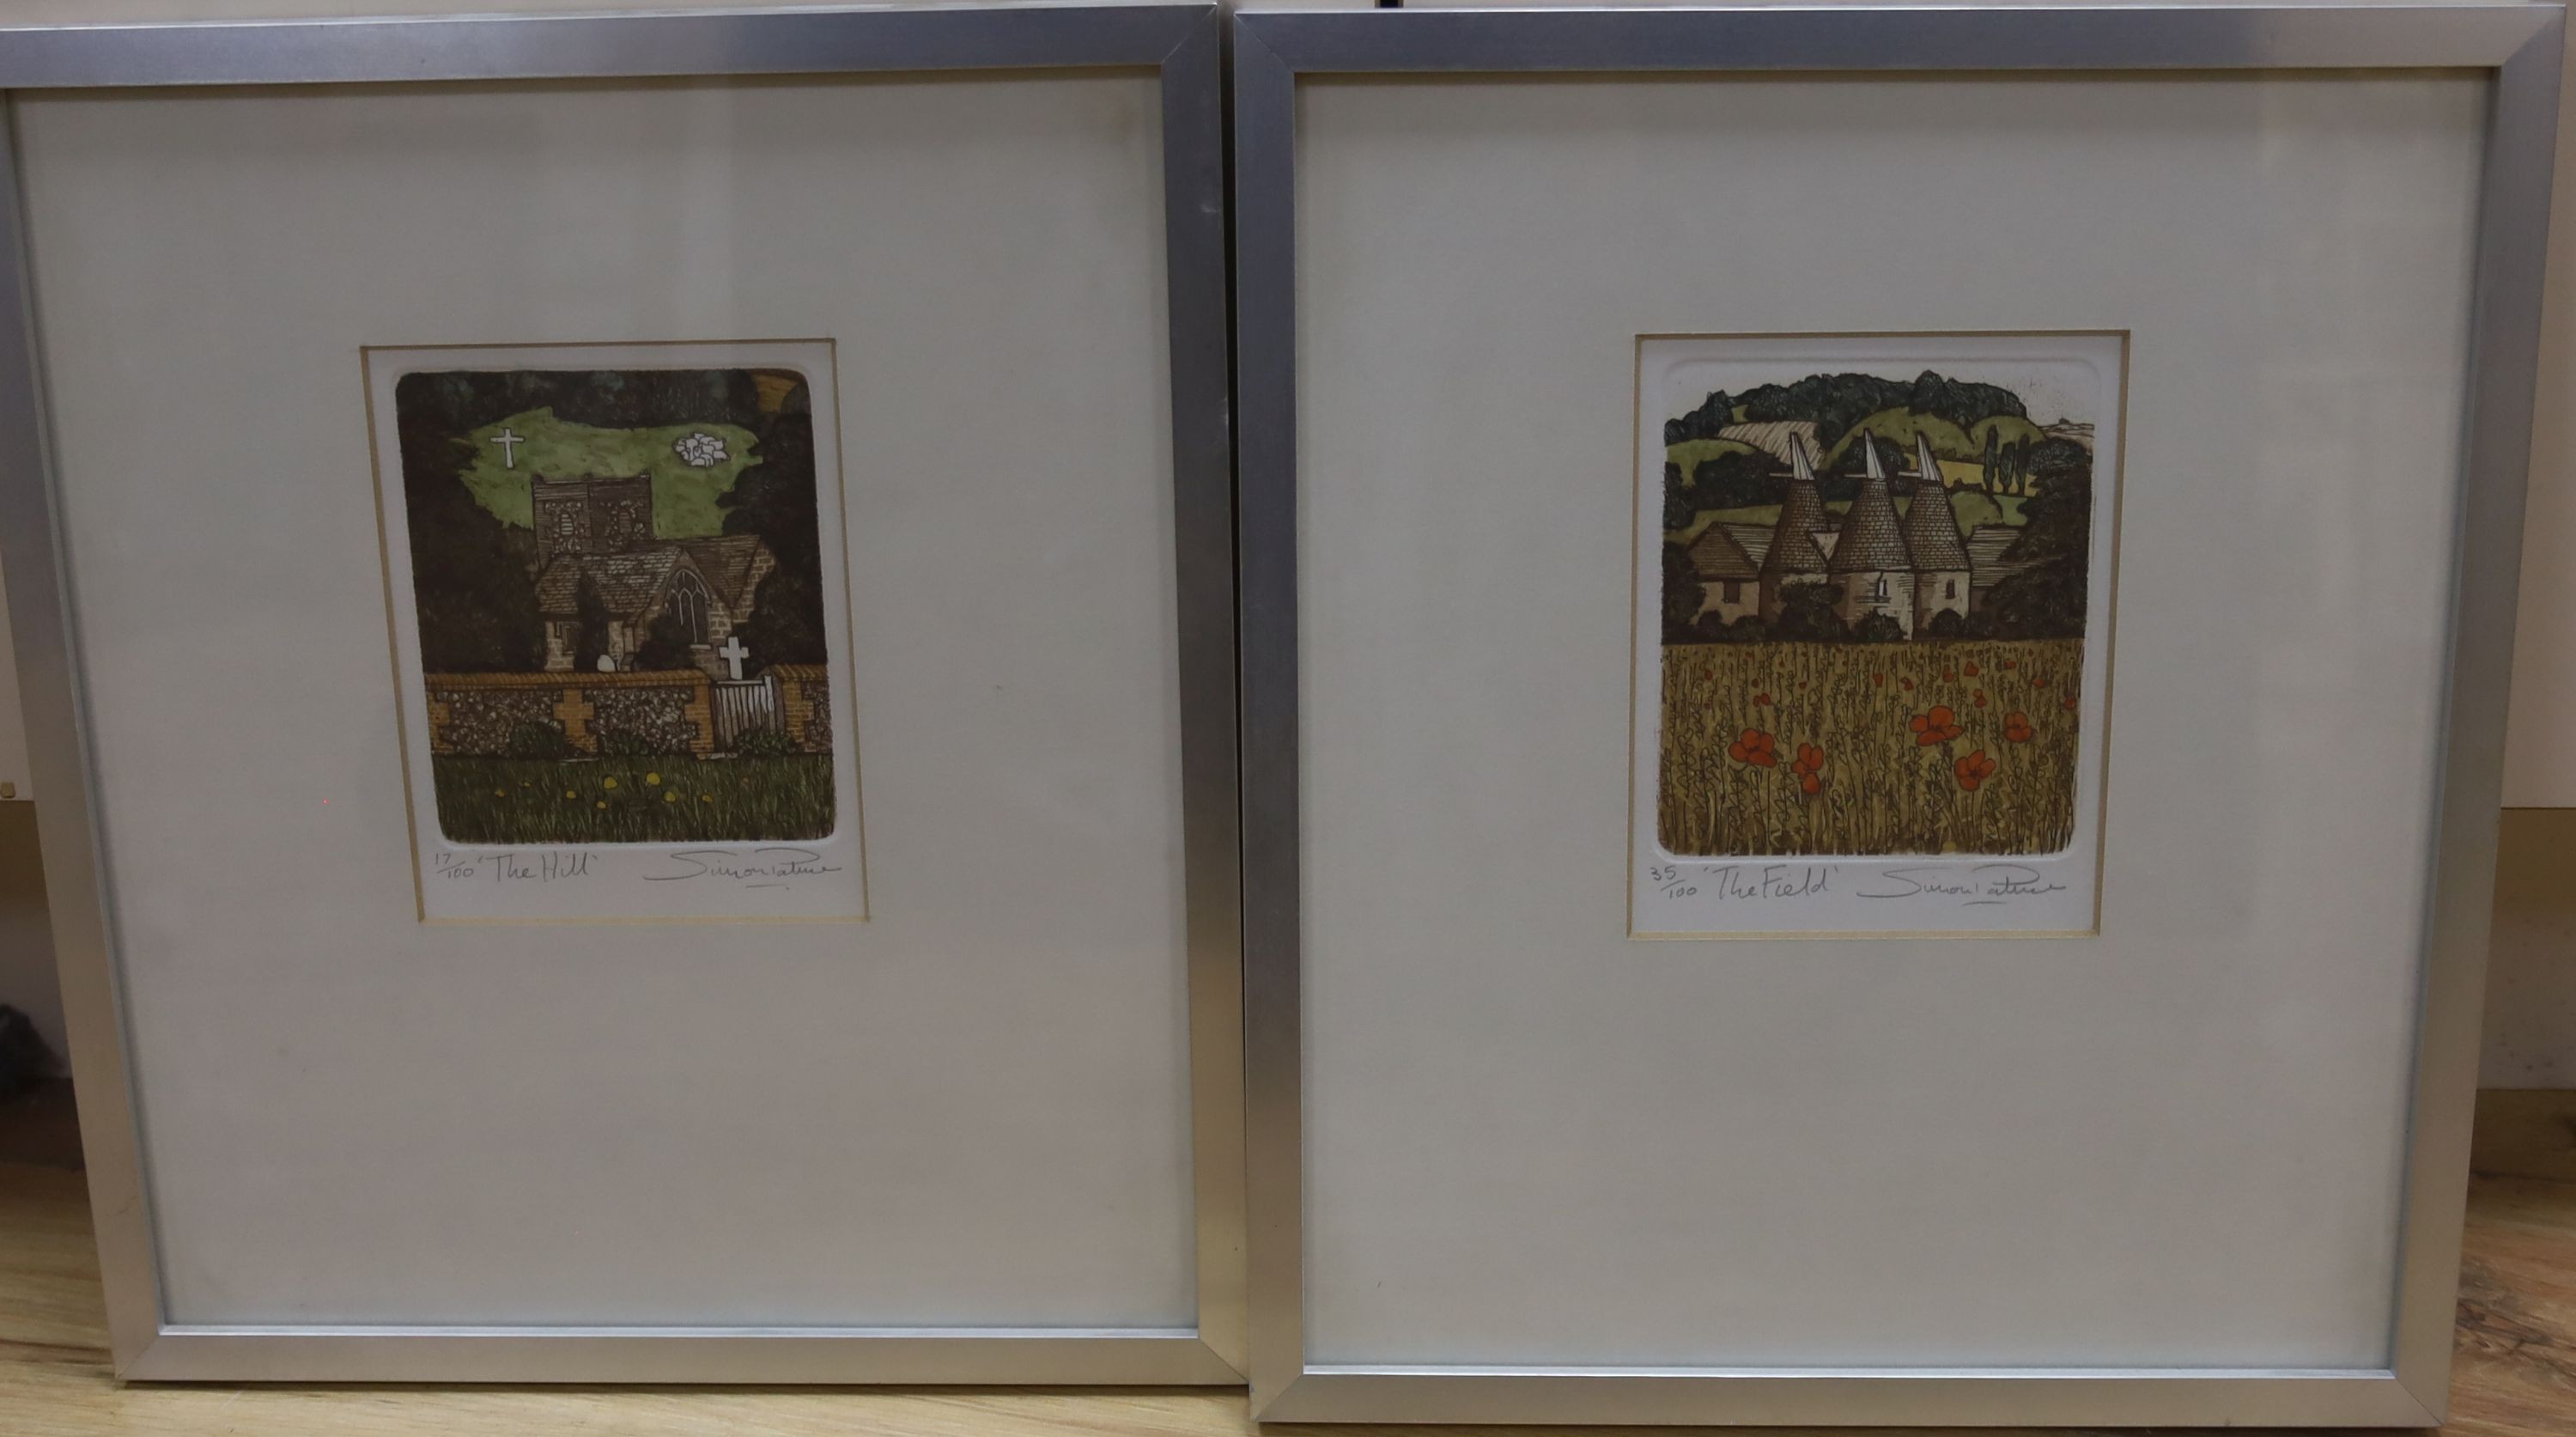 Simon Palmer, two limited edition prints, 'The Hill' and 'The Field', signed in pencil, 17/100 and 35/100, 12.5 x 11cm